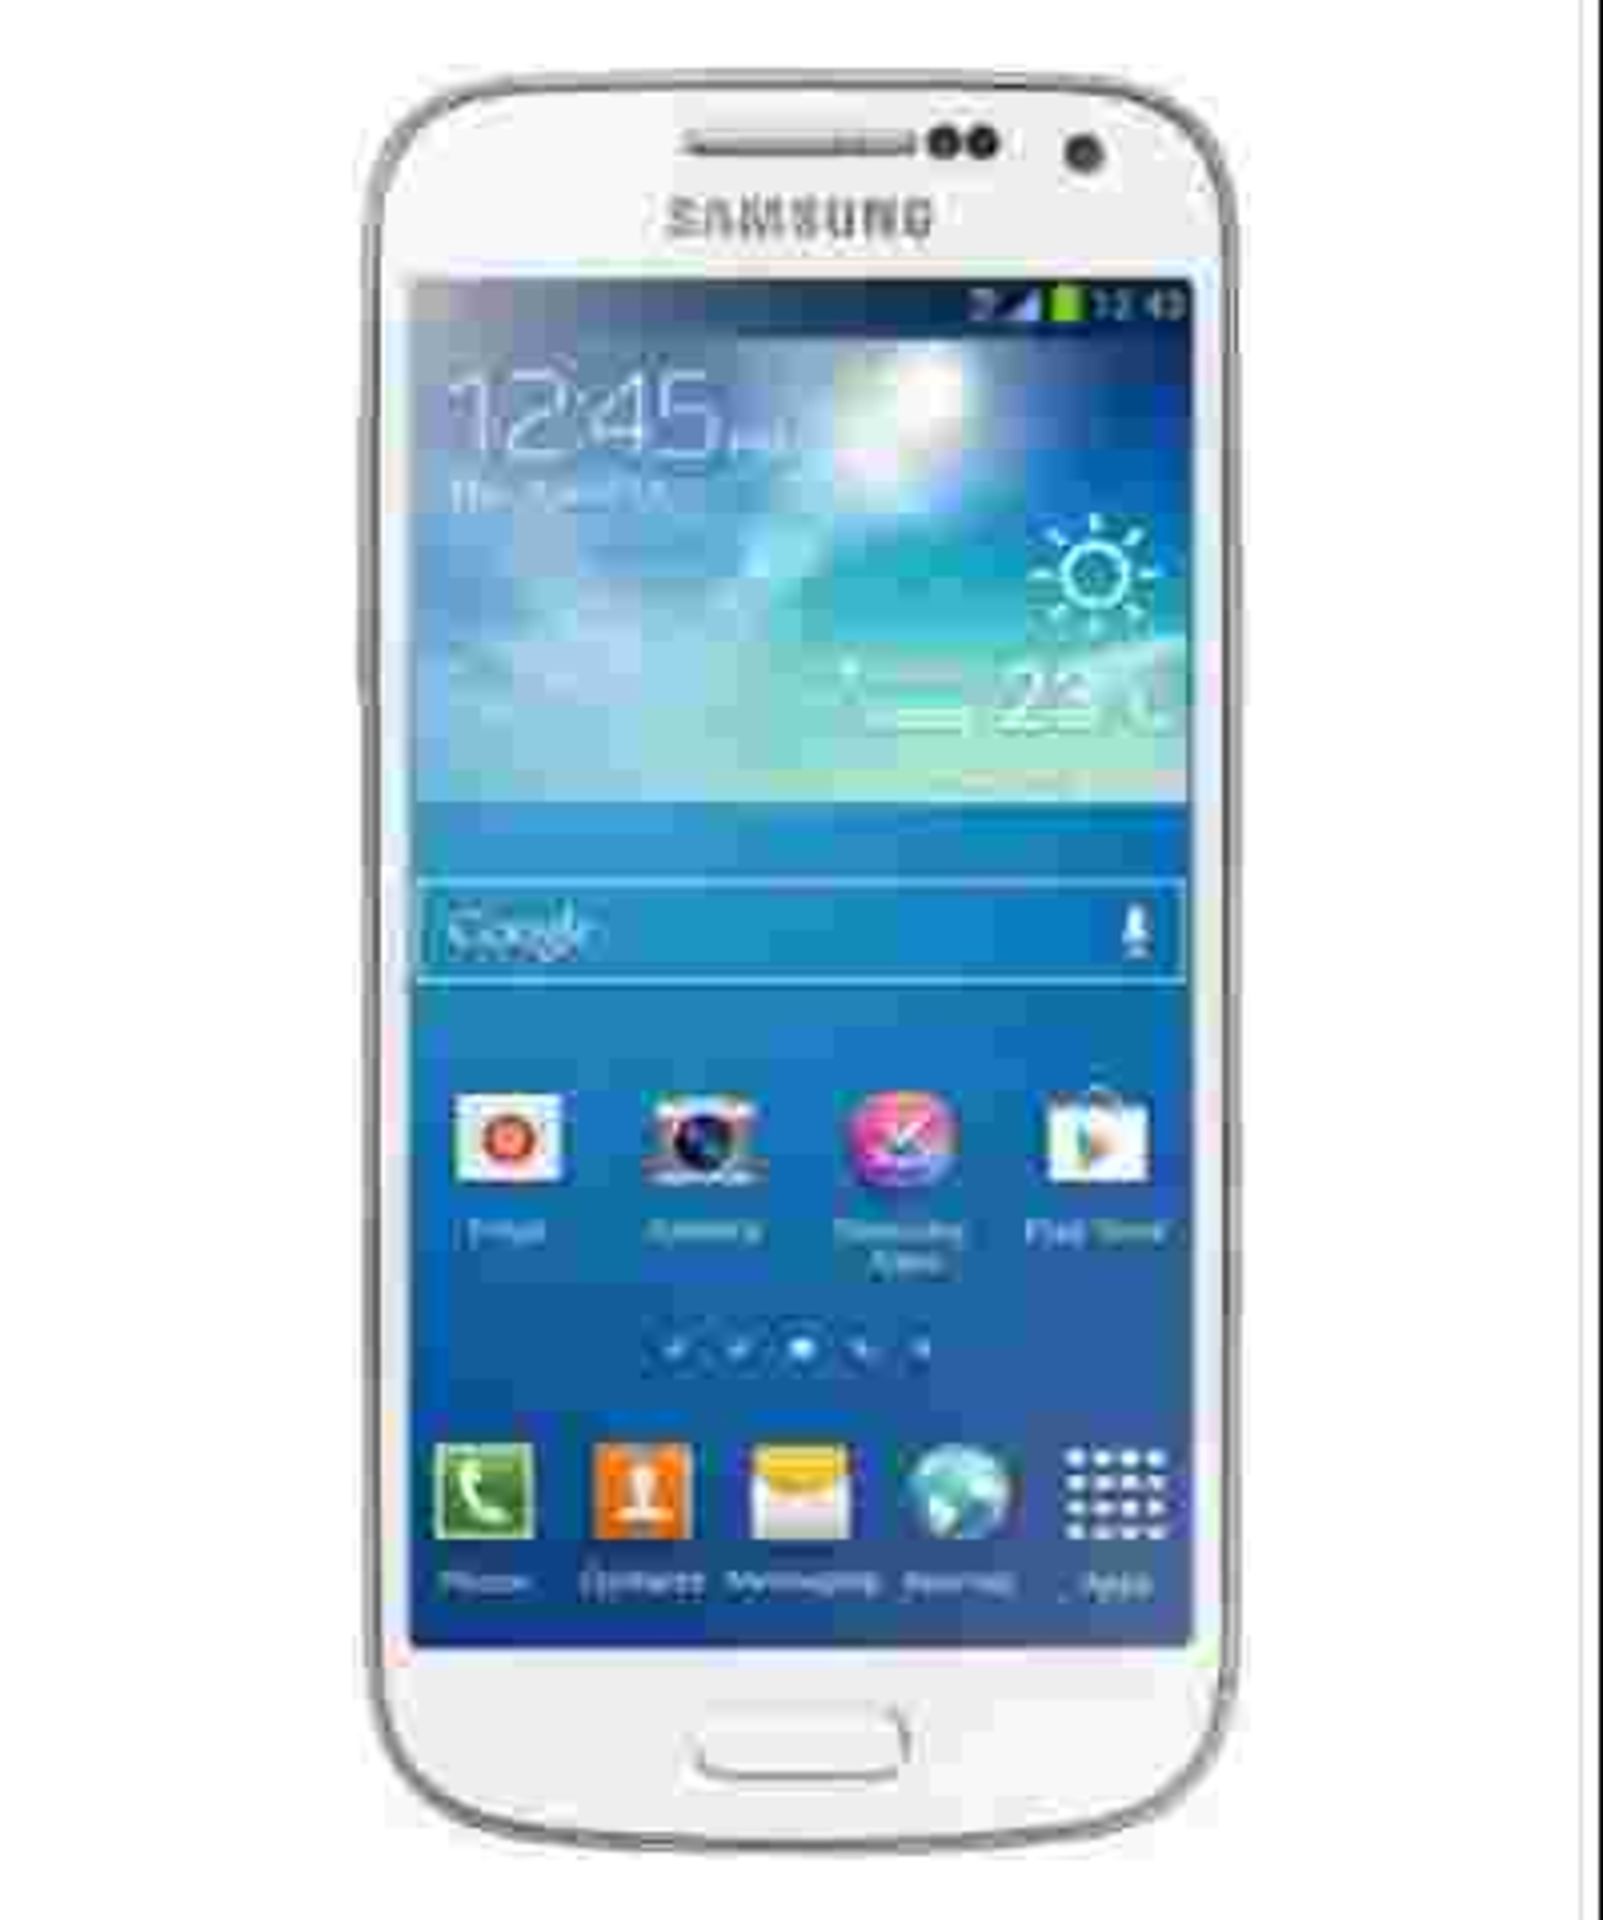 Grade A Samsung S4 Mini(I9190) Colours May Vary - Item Available After Approx 15 Working Days After